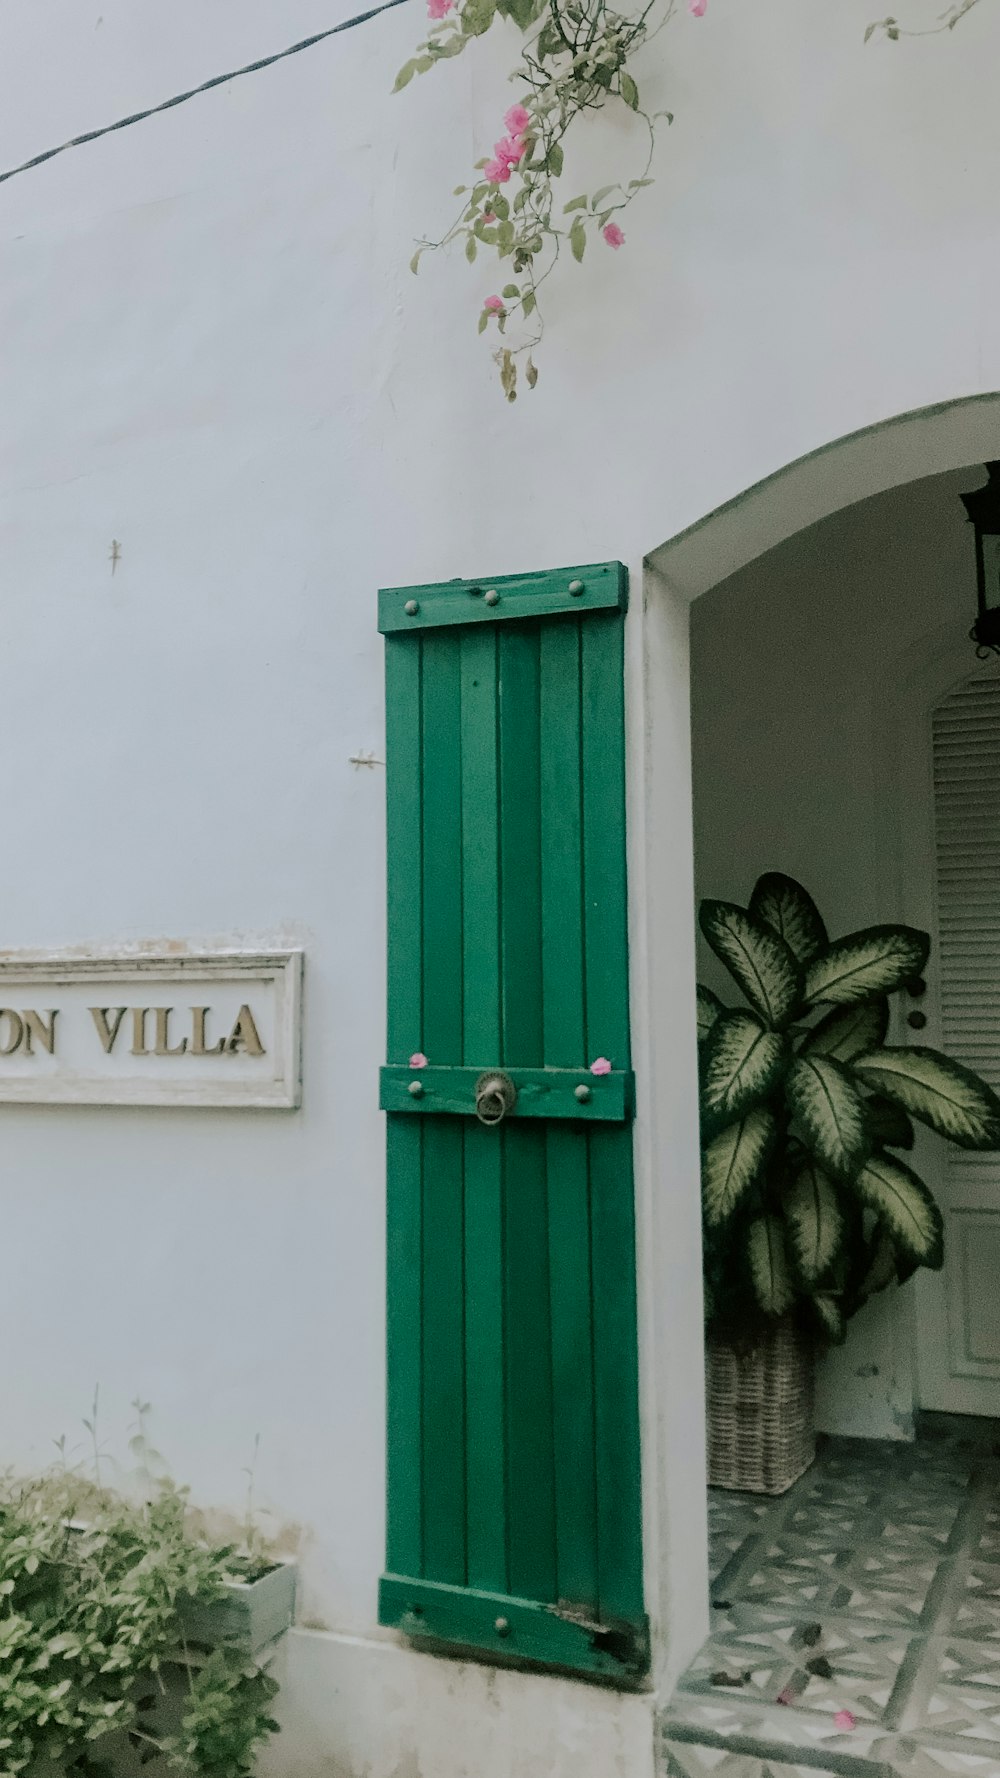 a white building with a green door and green shutters